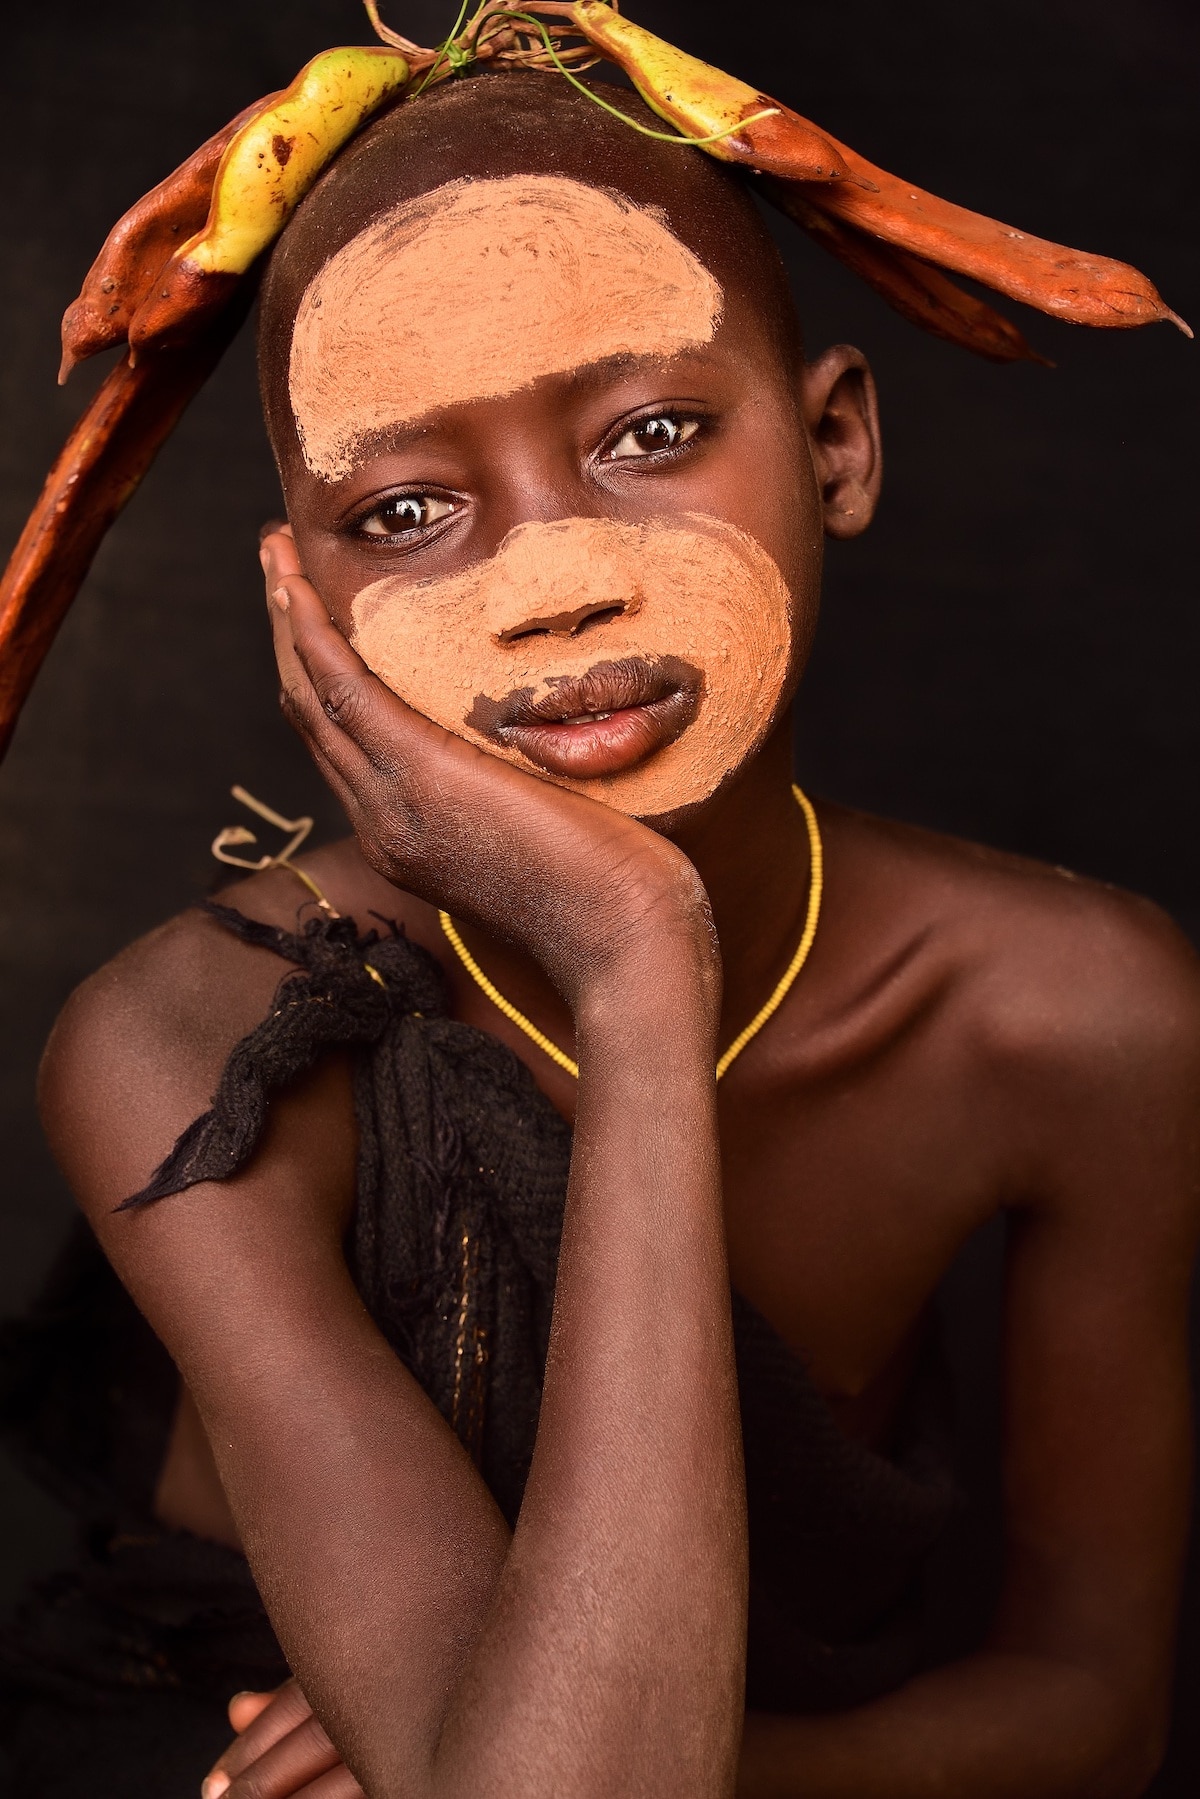 Portrait of the Surma Tribe Body Painting